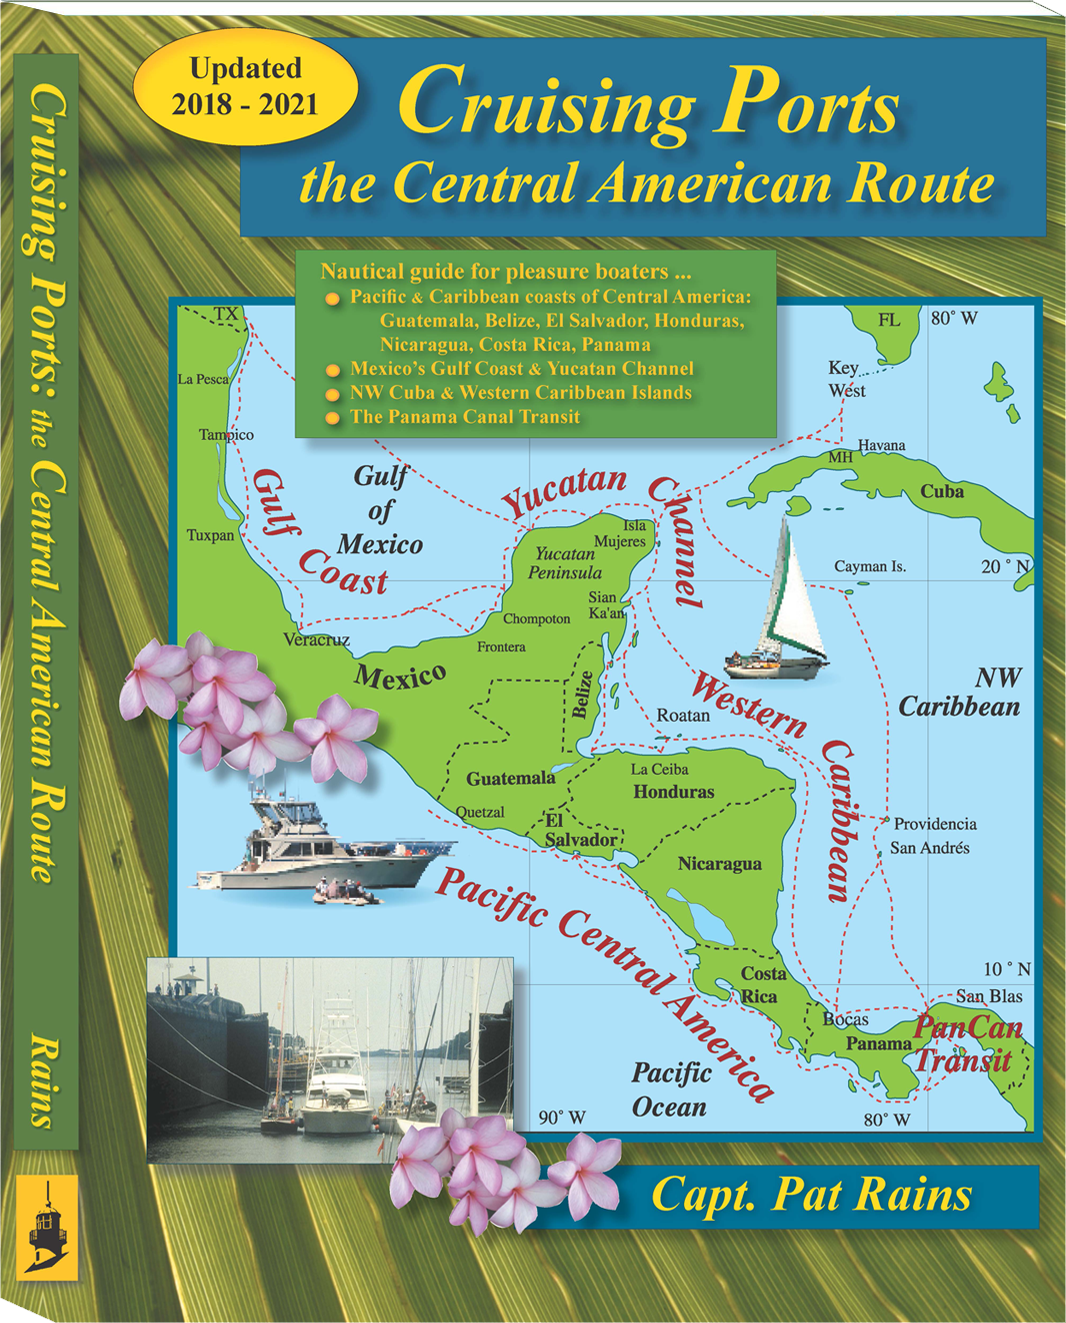 cruise stops in central america